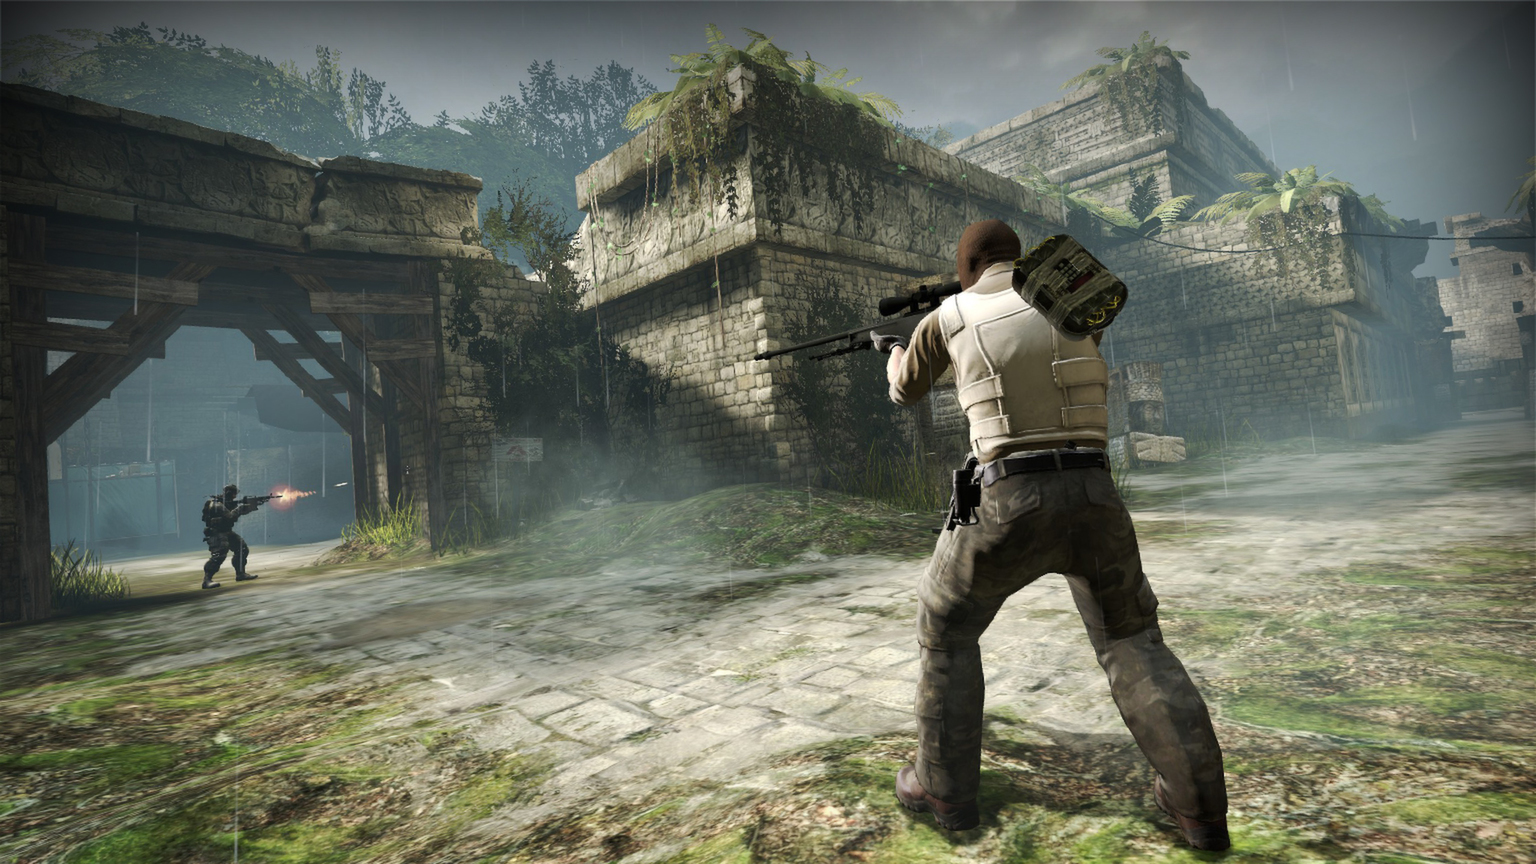  CS:GO's Trusted Mode anticheat system is live, but it's causing problems 